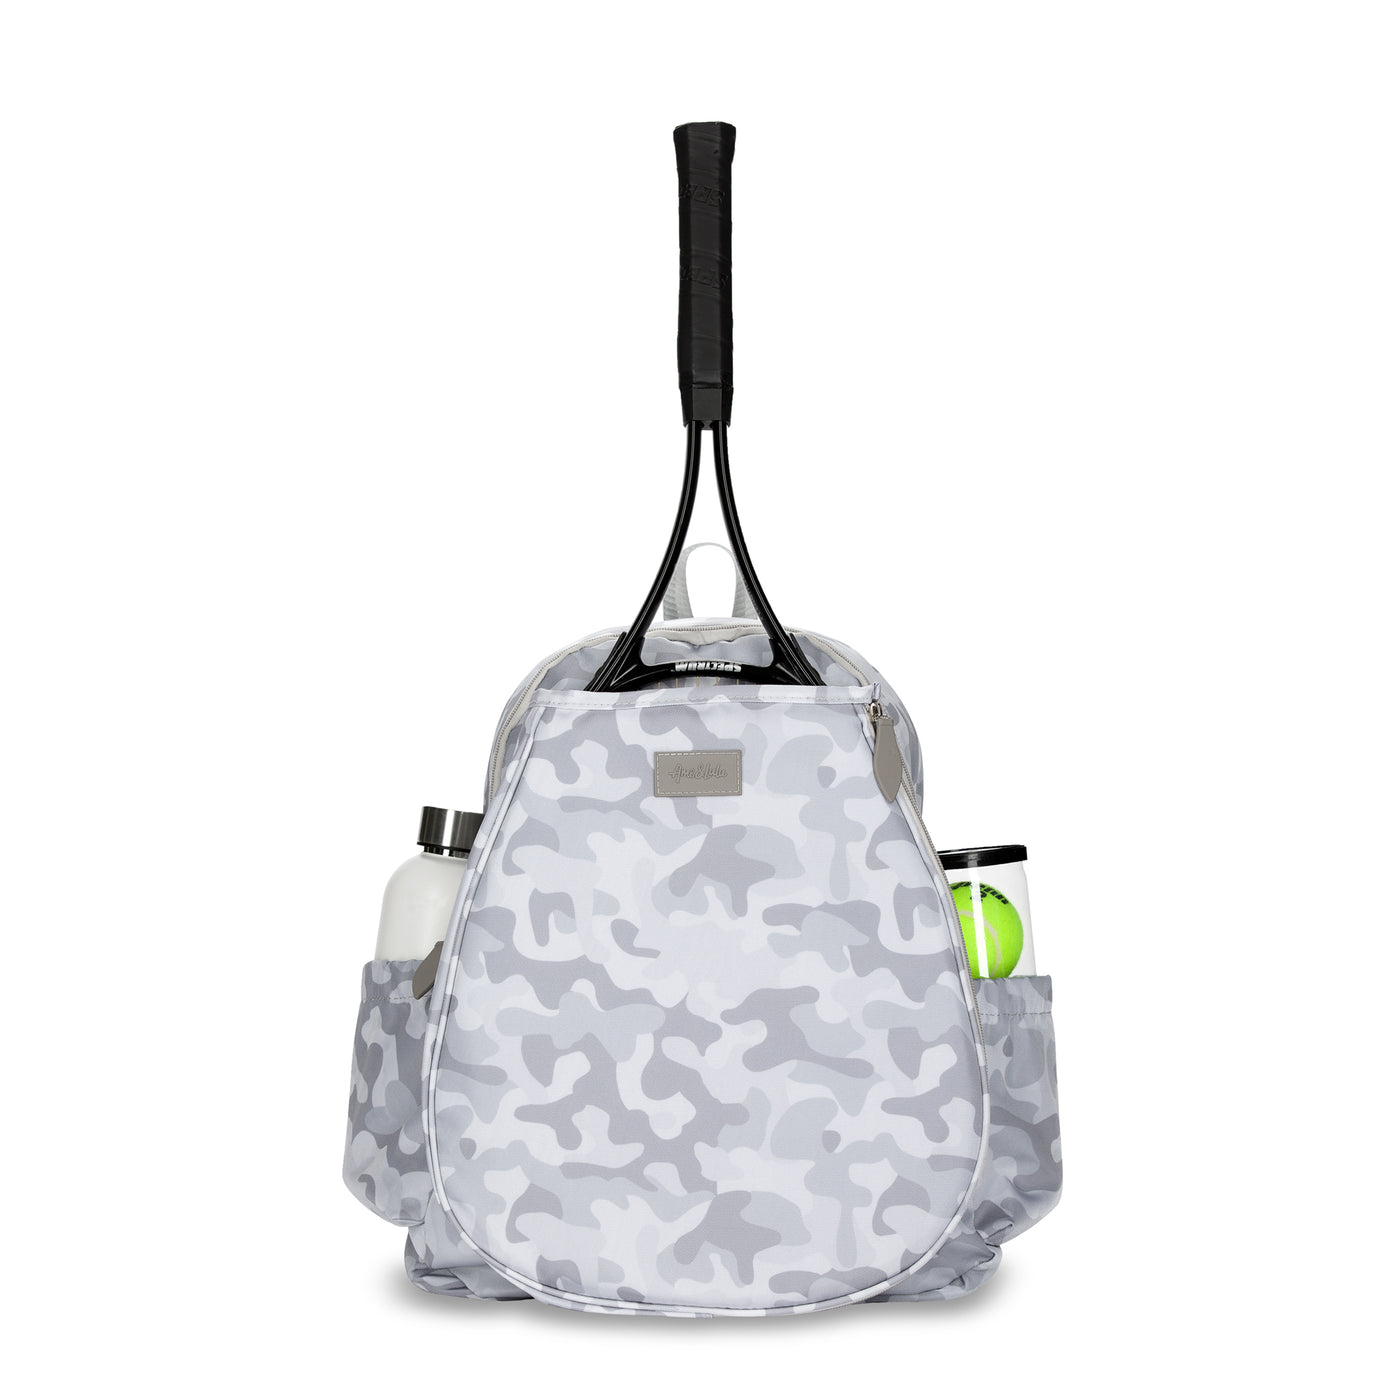 Front view of grey camo tennis backpack with tennis racquet in front pocket. Side pockets are holding a water bottle and tennis balls.